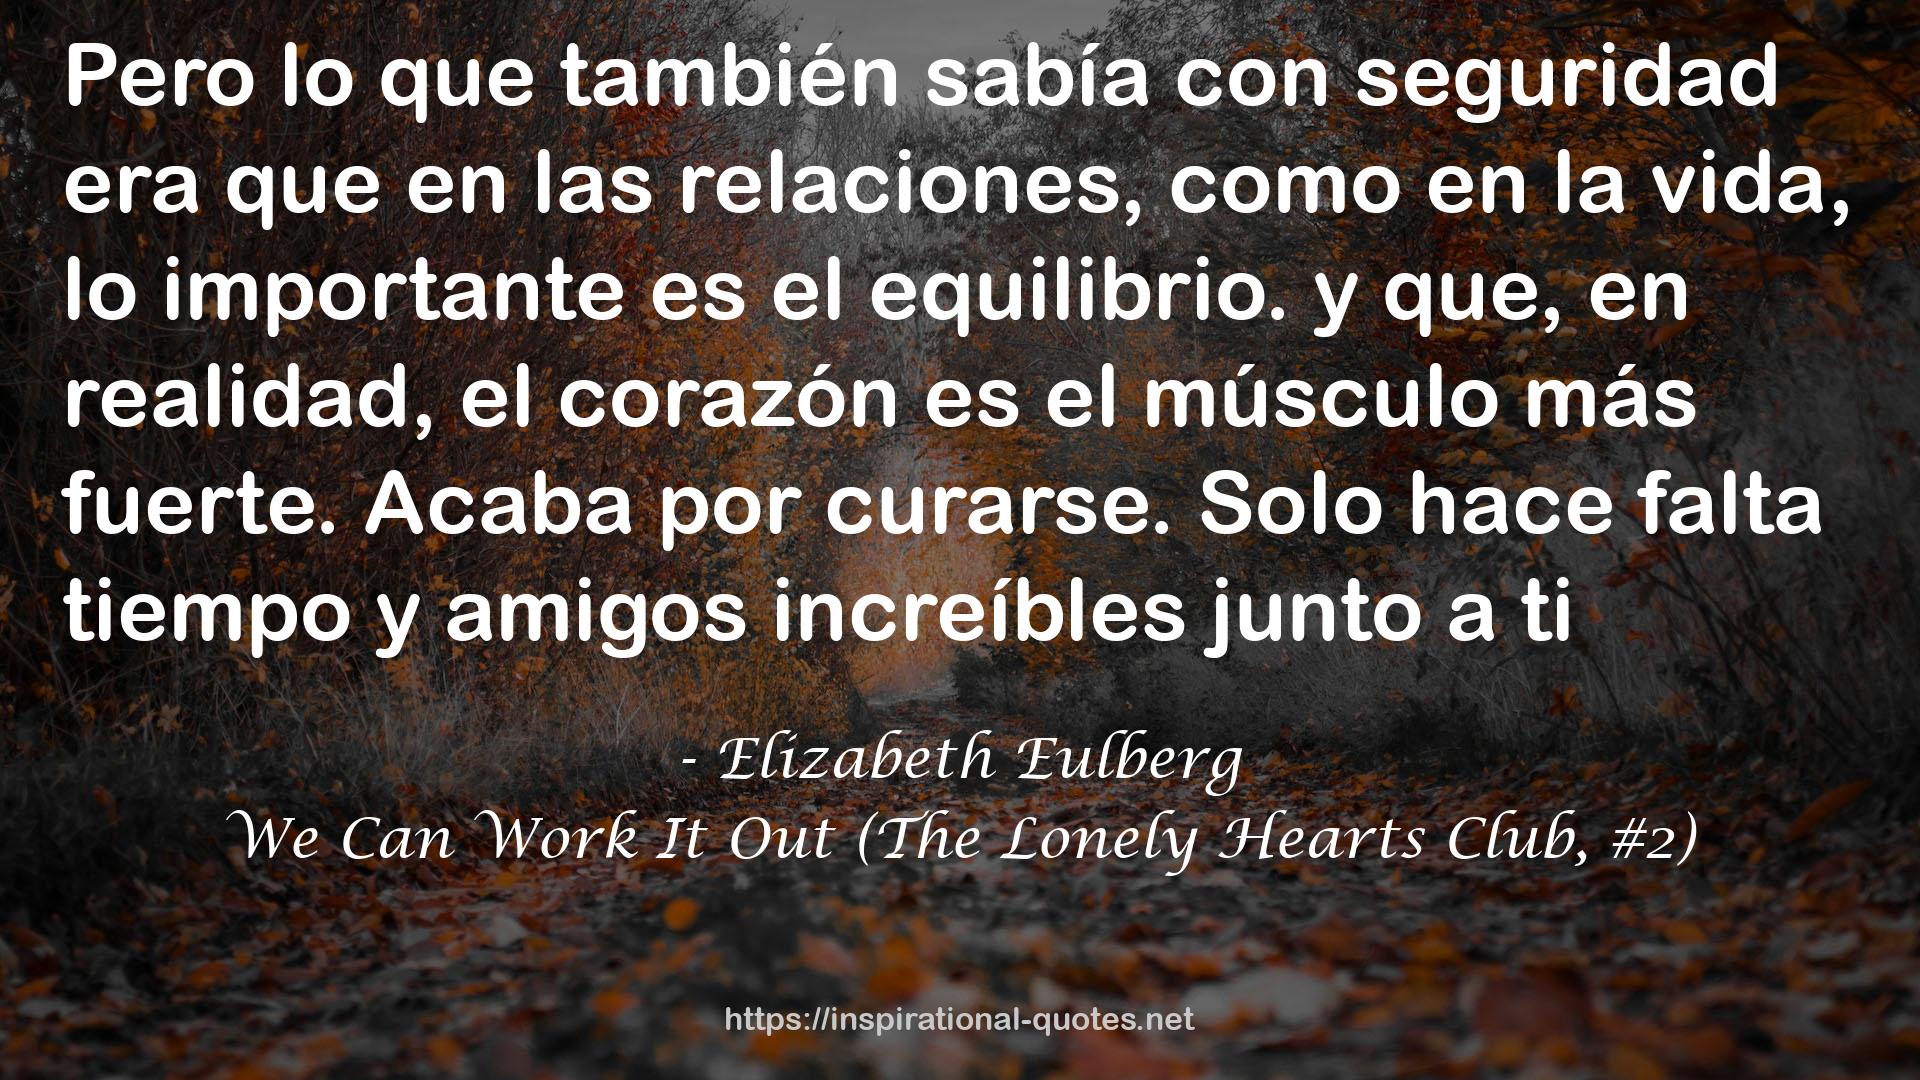 We Can Work It Out (The Lonely Hearts Club, #2) QUOTES